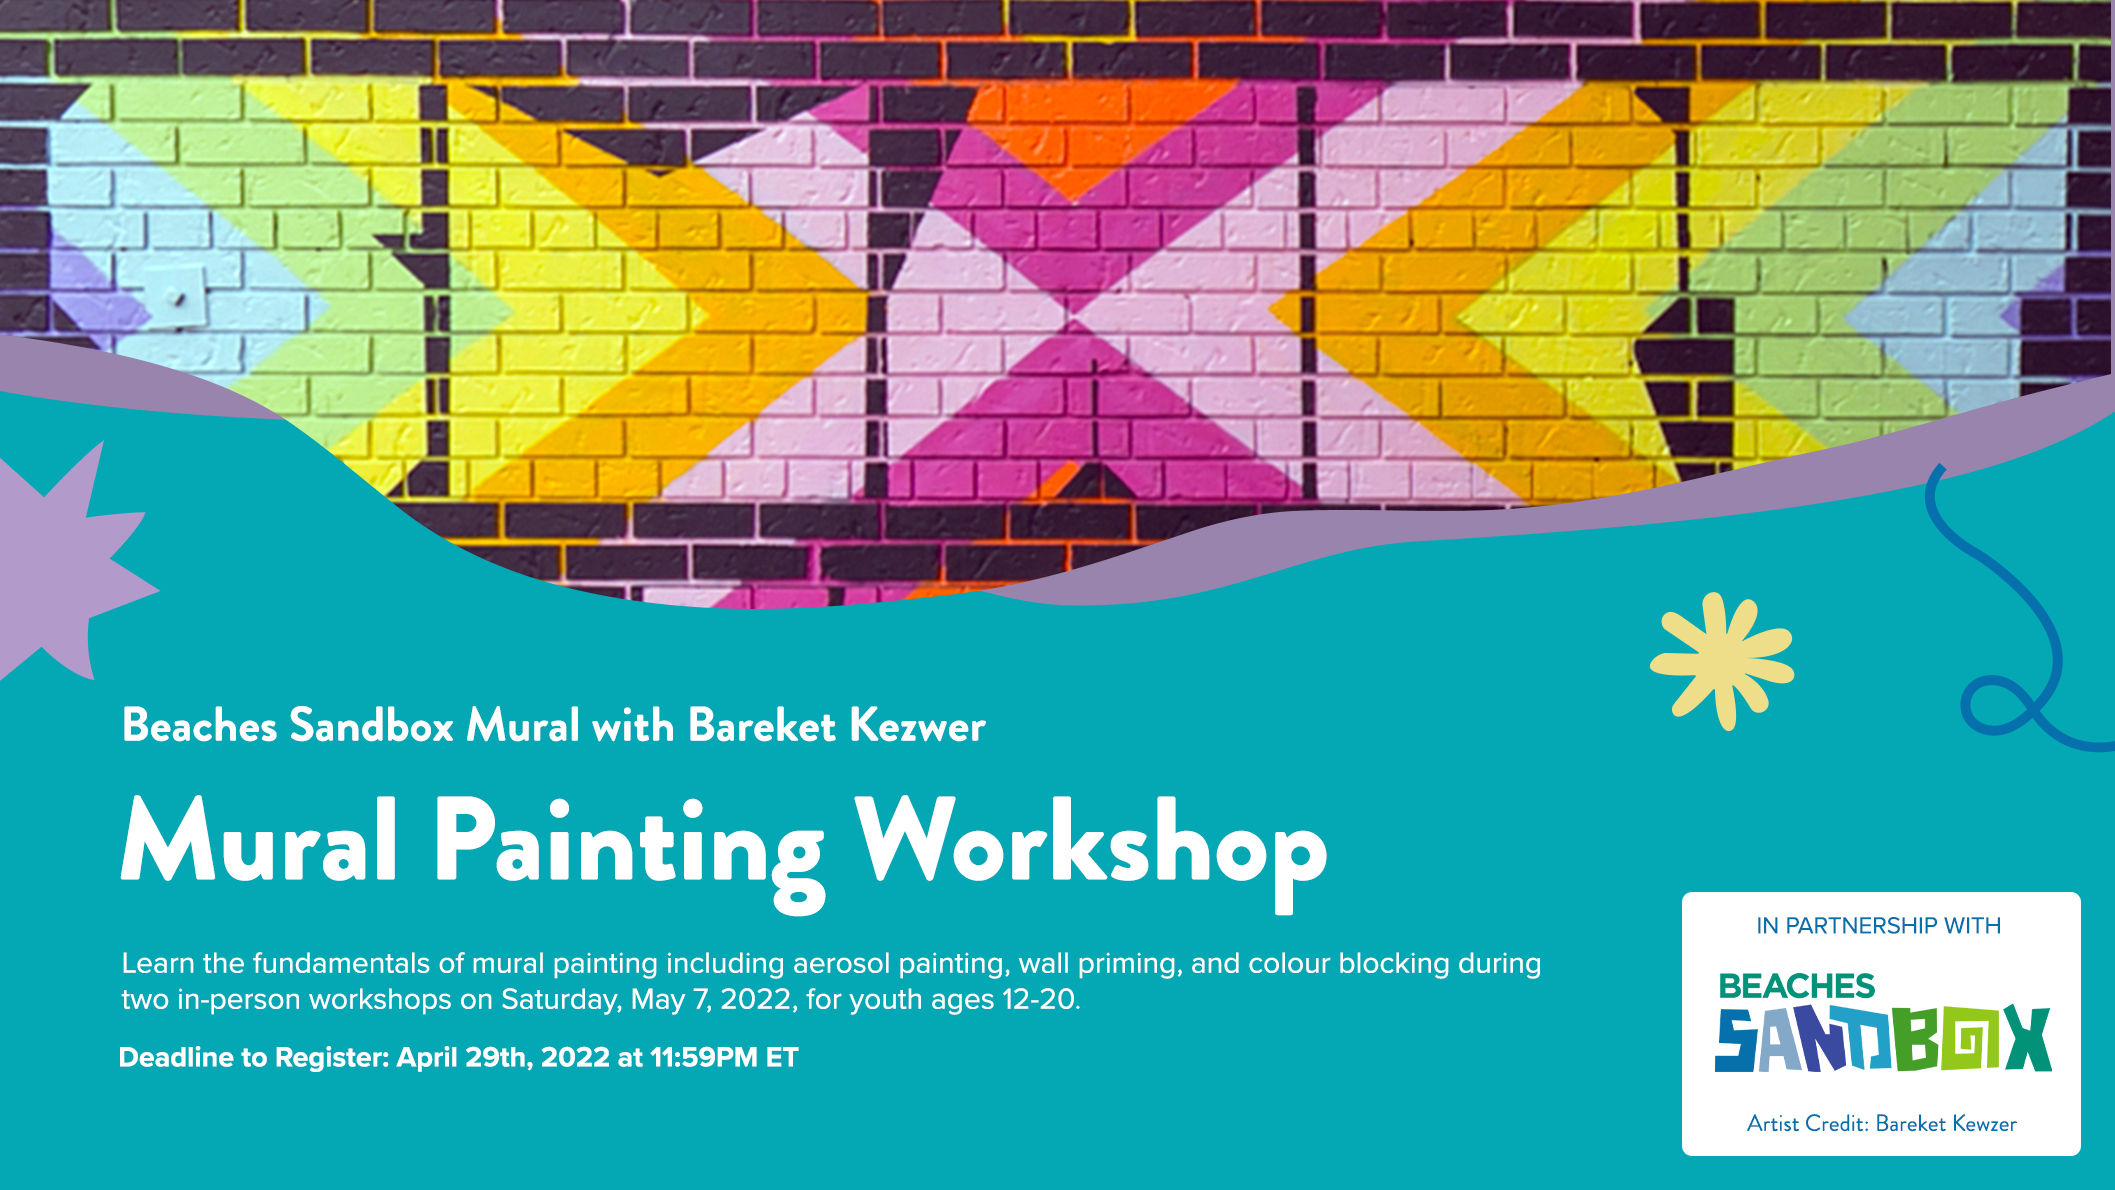 A rectangular image graphic that features a mural painted on a brick wall combining typography with bright colours set against a dark background. The bottom half of the graphic features the Beaches Sandbox logo and text that reads “Beaches Sandbox Mural with Bareket Kezwer. Mural Painting Workshop. Learn the fundamentals of mural painting including aerosol painting, wall priming and colourful blocking during two in-person workshops on Saturday May7, 2022 for youth ages 12-20. Decline to Register: April 29th, 2022 at 11:59 PM ET.” 